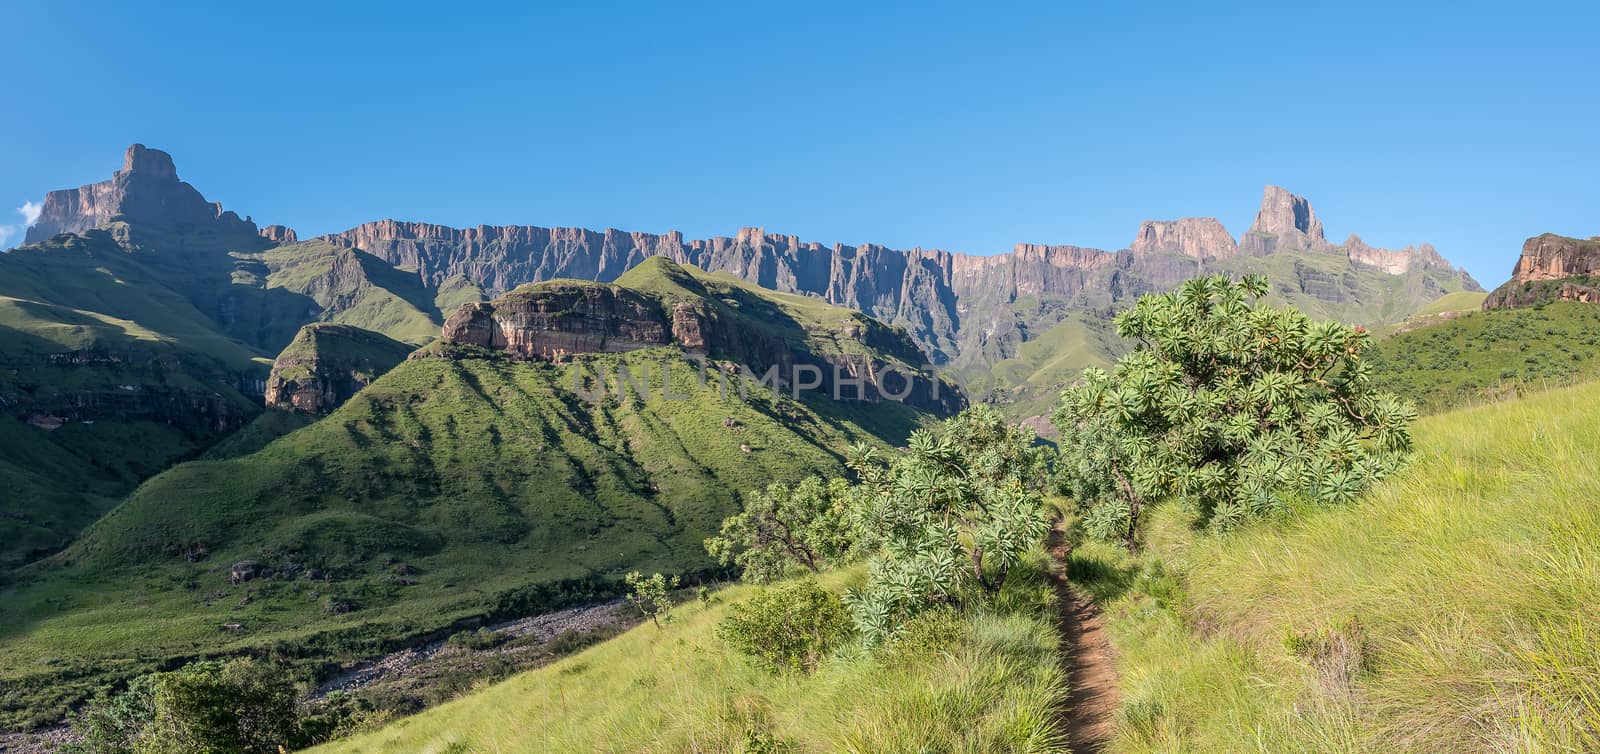 Panoramic view from the Tugela Gorge hiking trail towards the Amphitheatre. The Tugela River and protea trees are visible